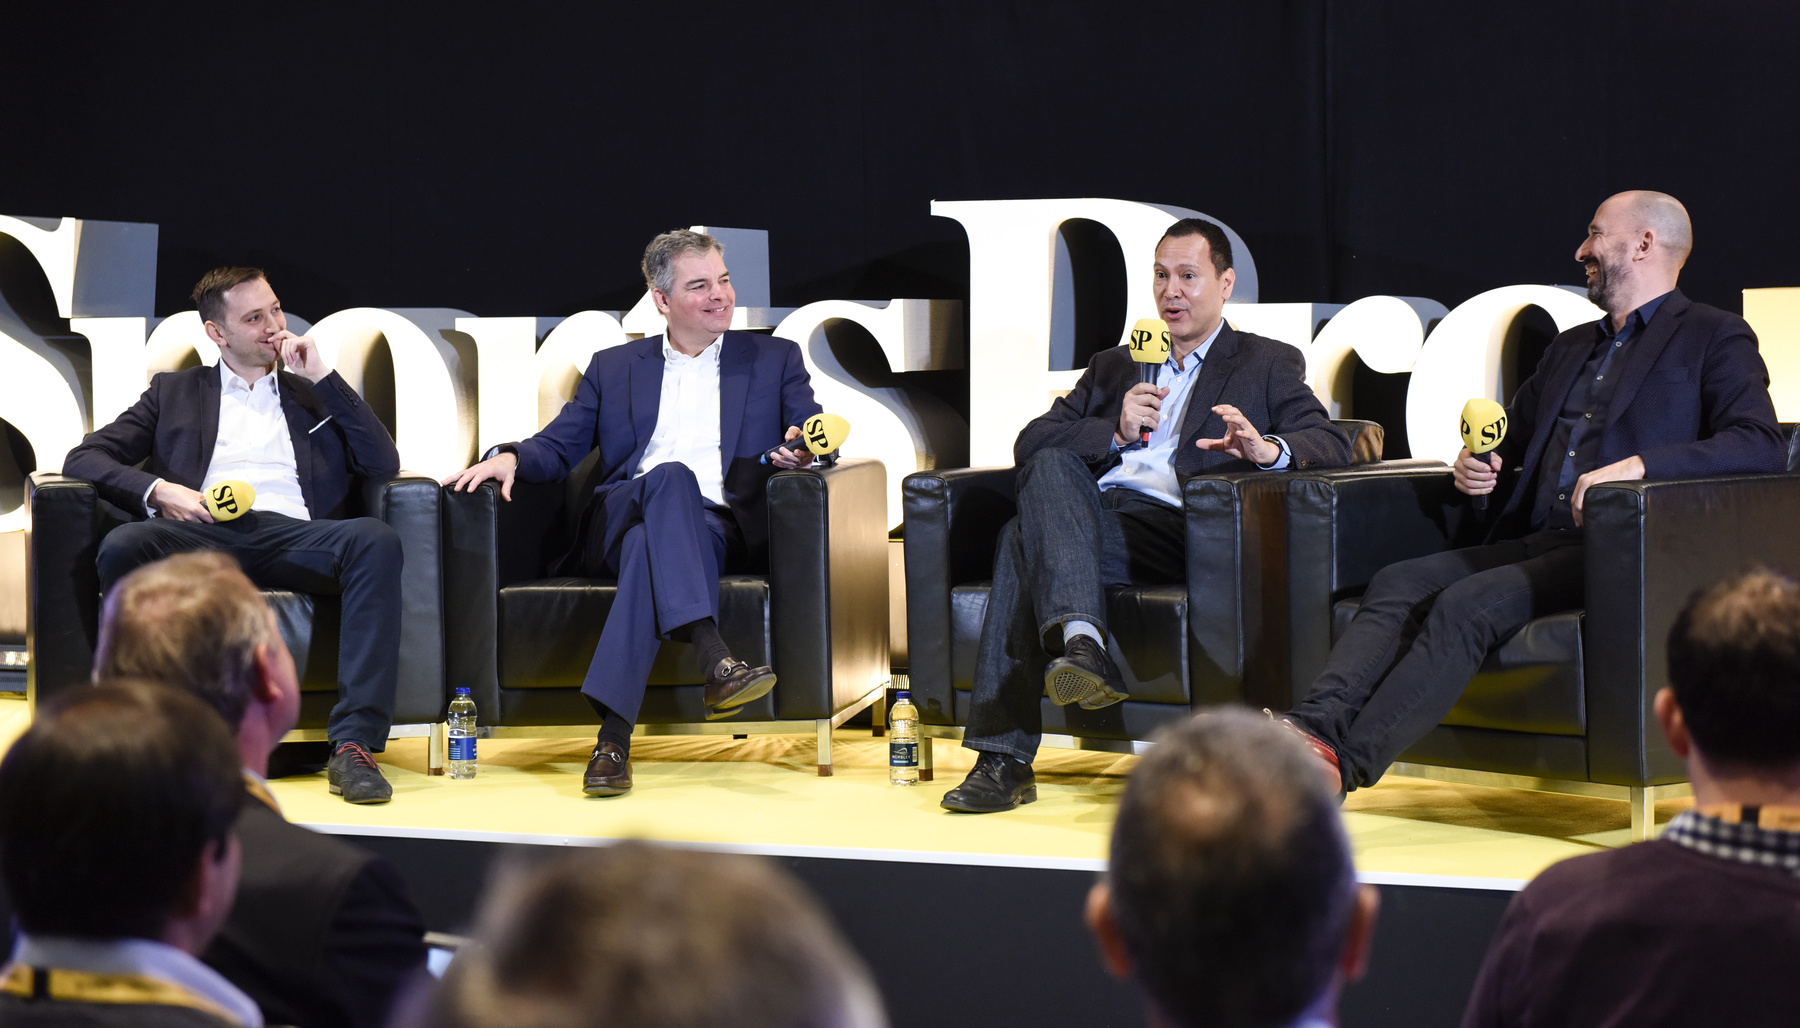 (from left) Tom Middleditch, Head of Digital, Eleven Sports Network; Mark Parkman, General Manager, Olympic Channel; Ralph Rivera, MD, Eurosport Digital, Eurosport (speaking into the microphone); Carlo de Marchis, Chief Product & Marketing Officer, deltatre Media, moderator